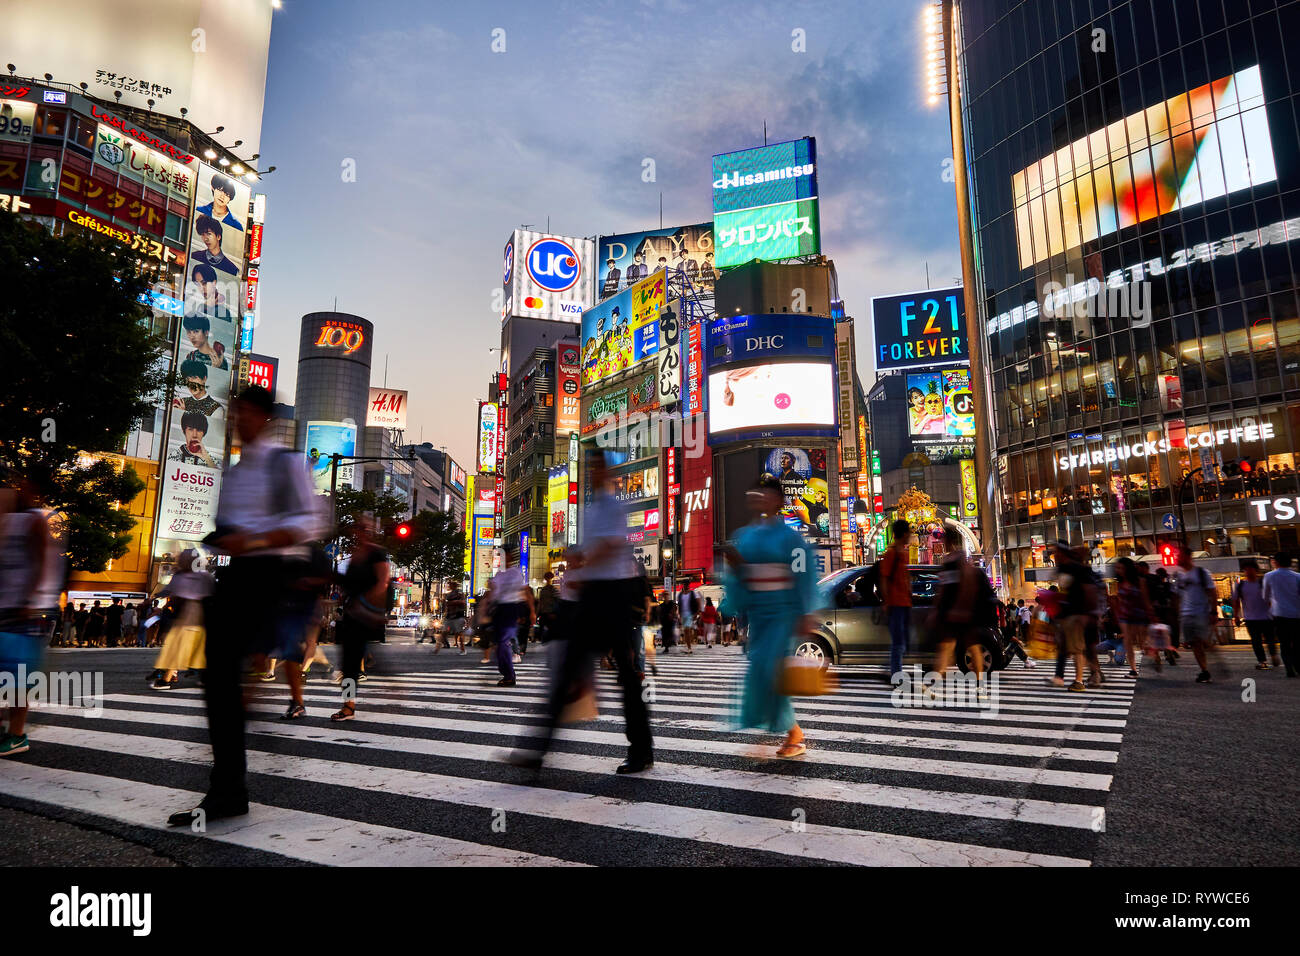 Pictured is Shibuya Crossing Tokyo at night, Japan. Stock Photo